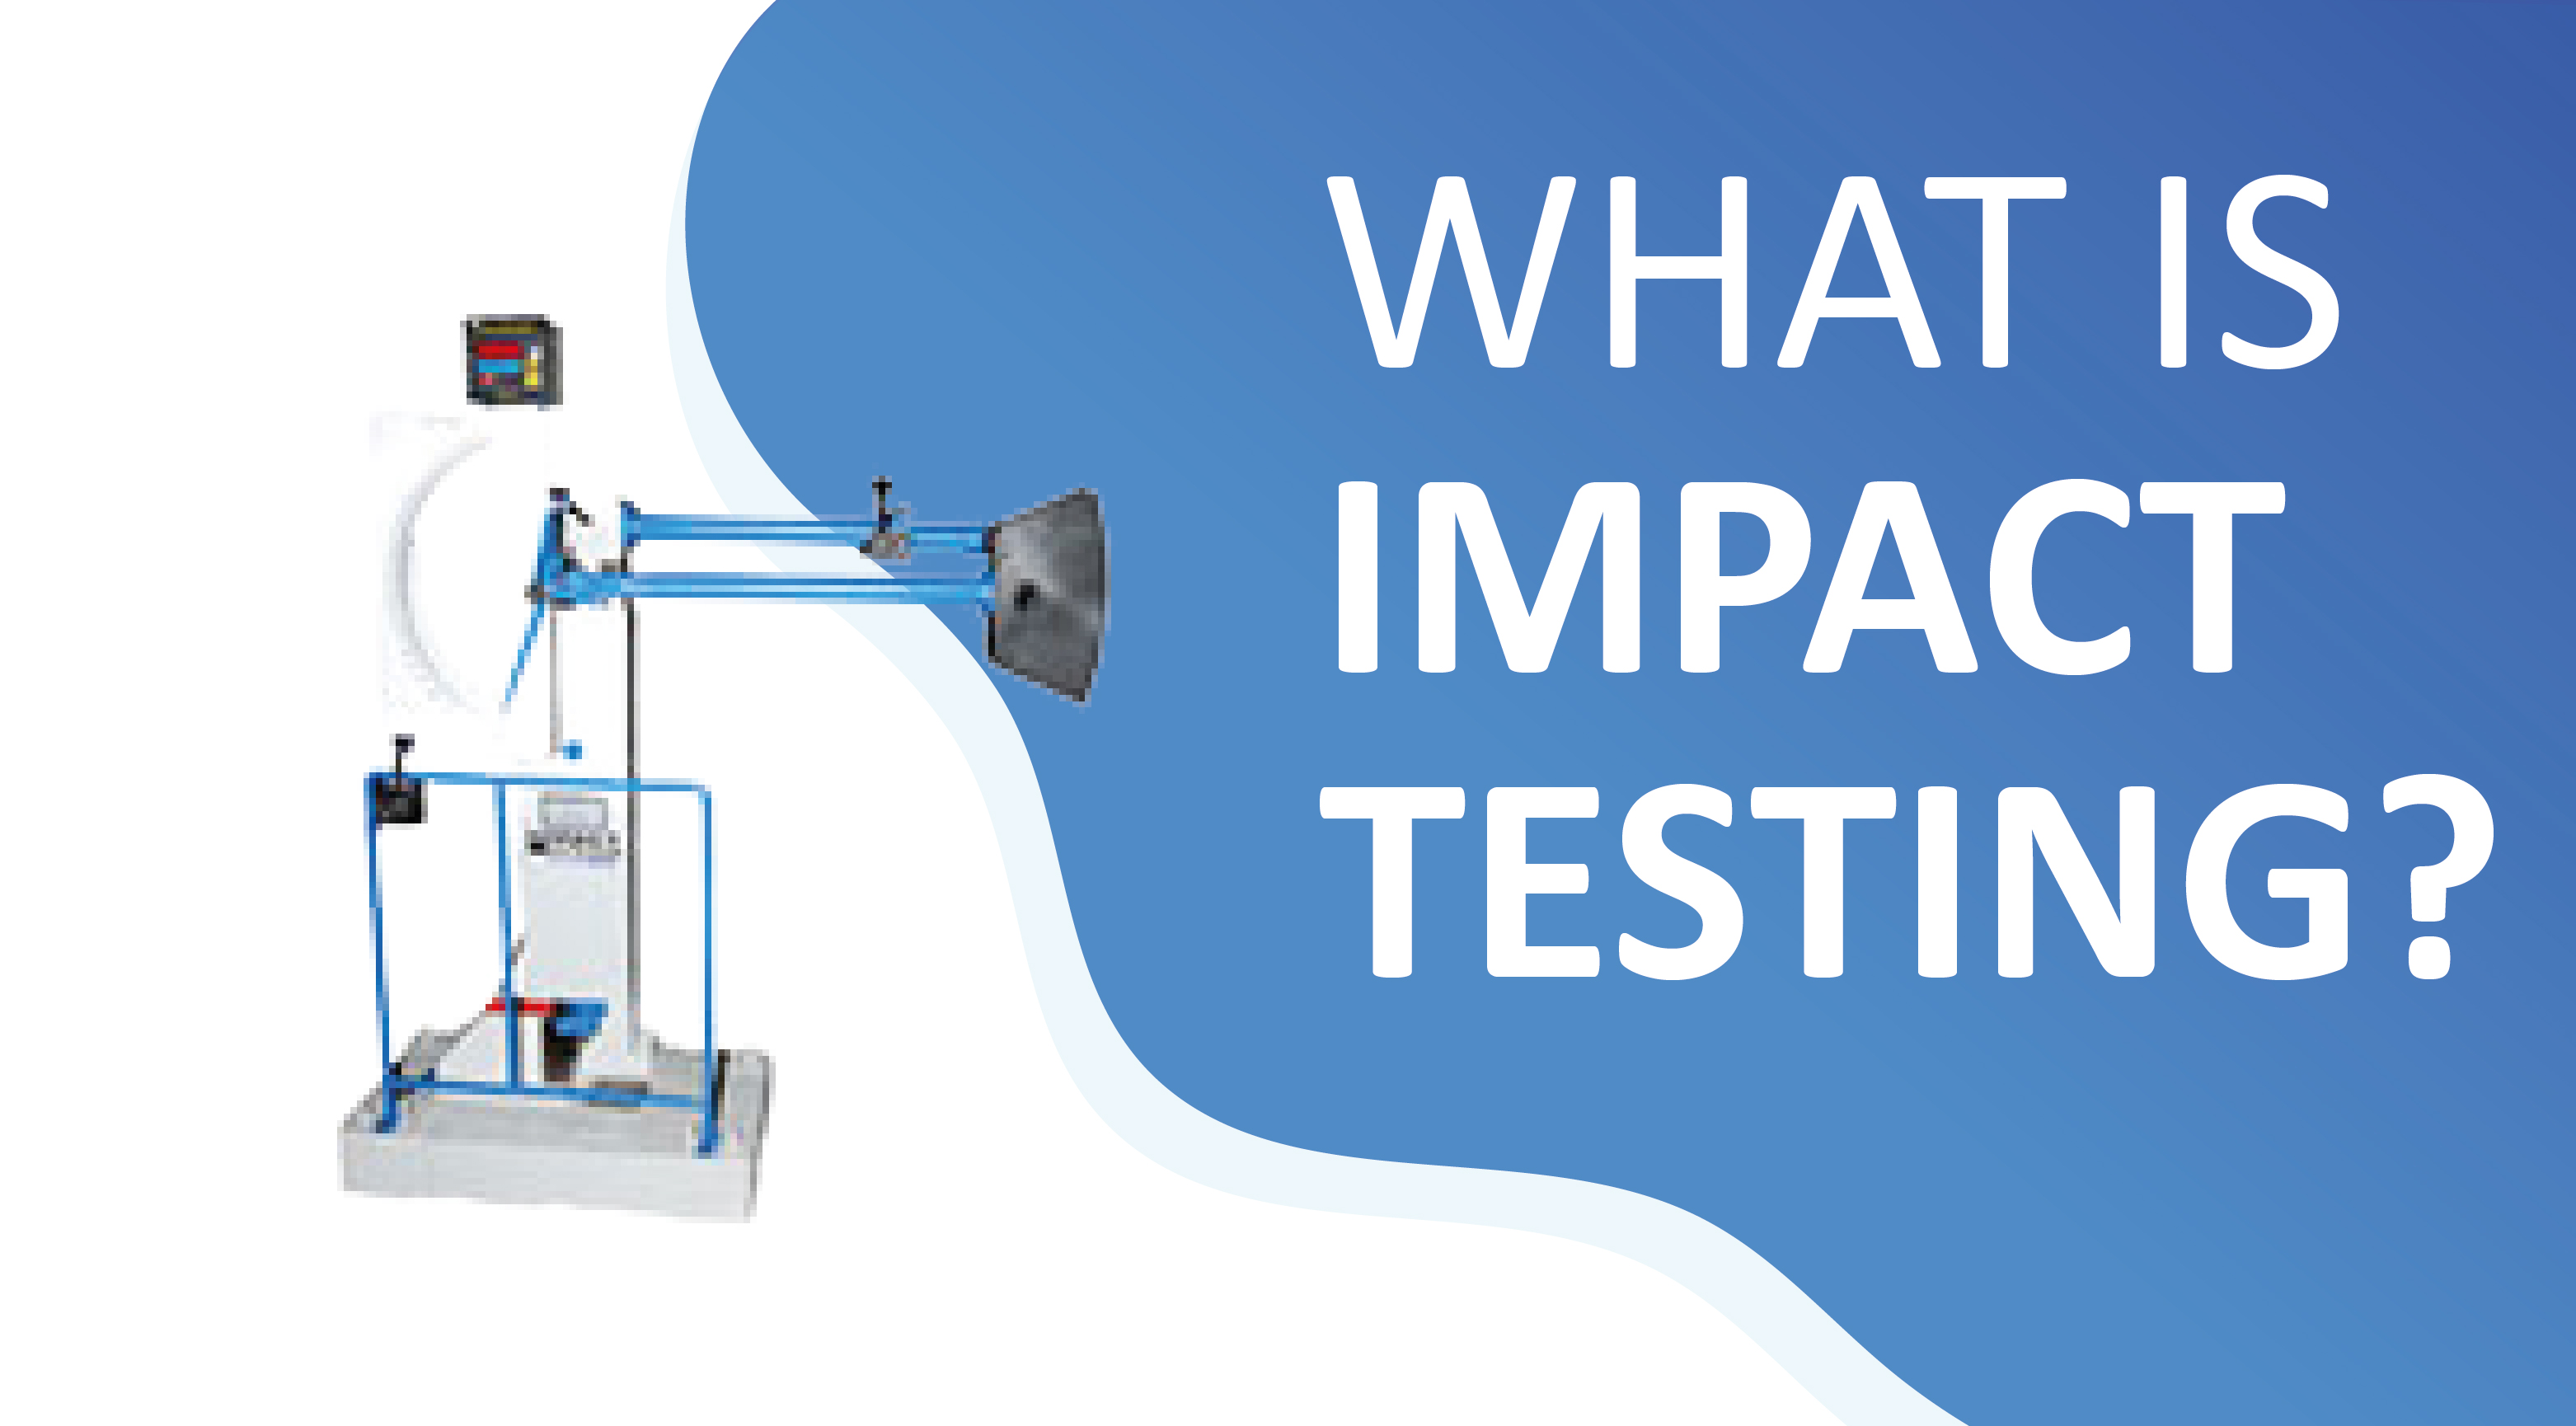 What is impact testing?